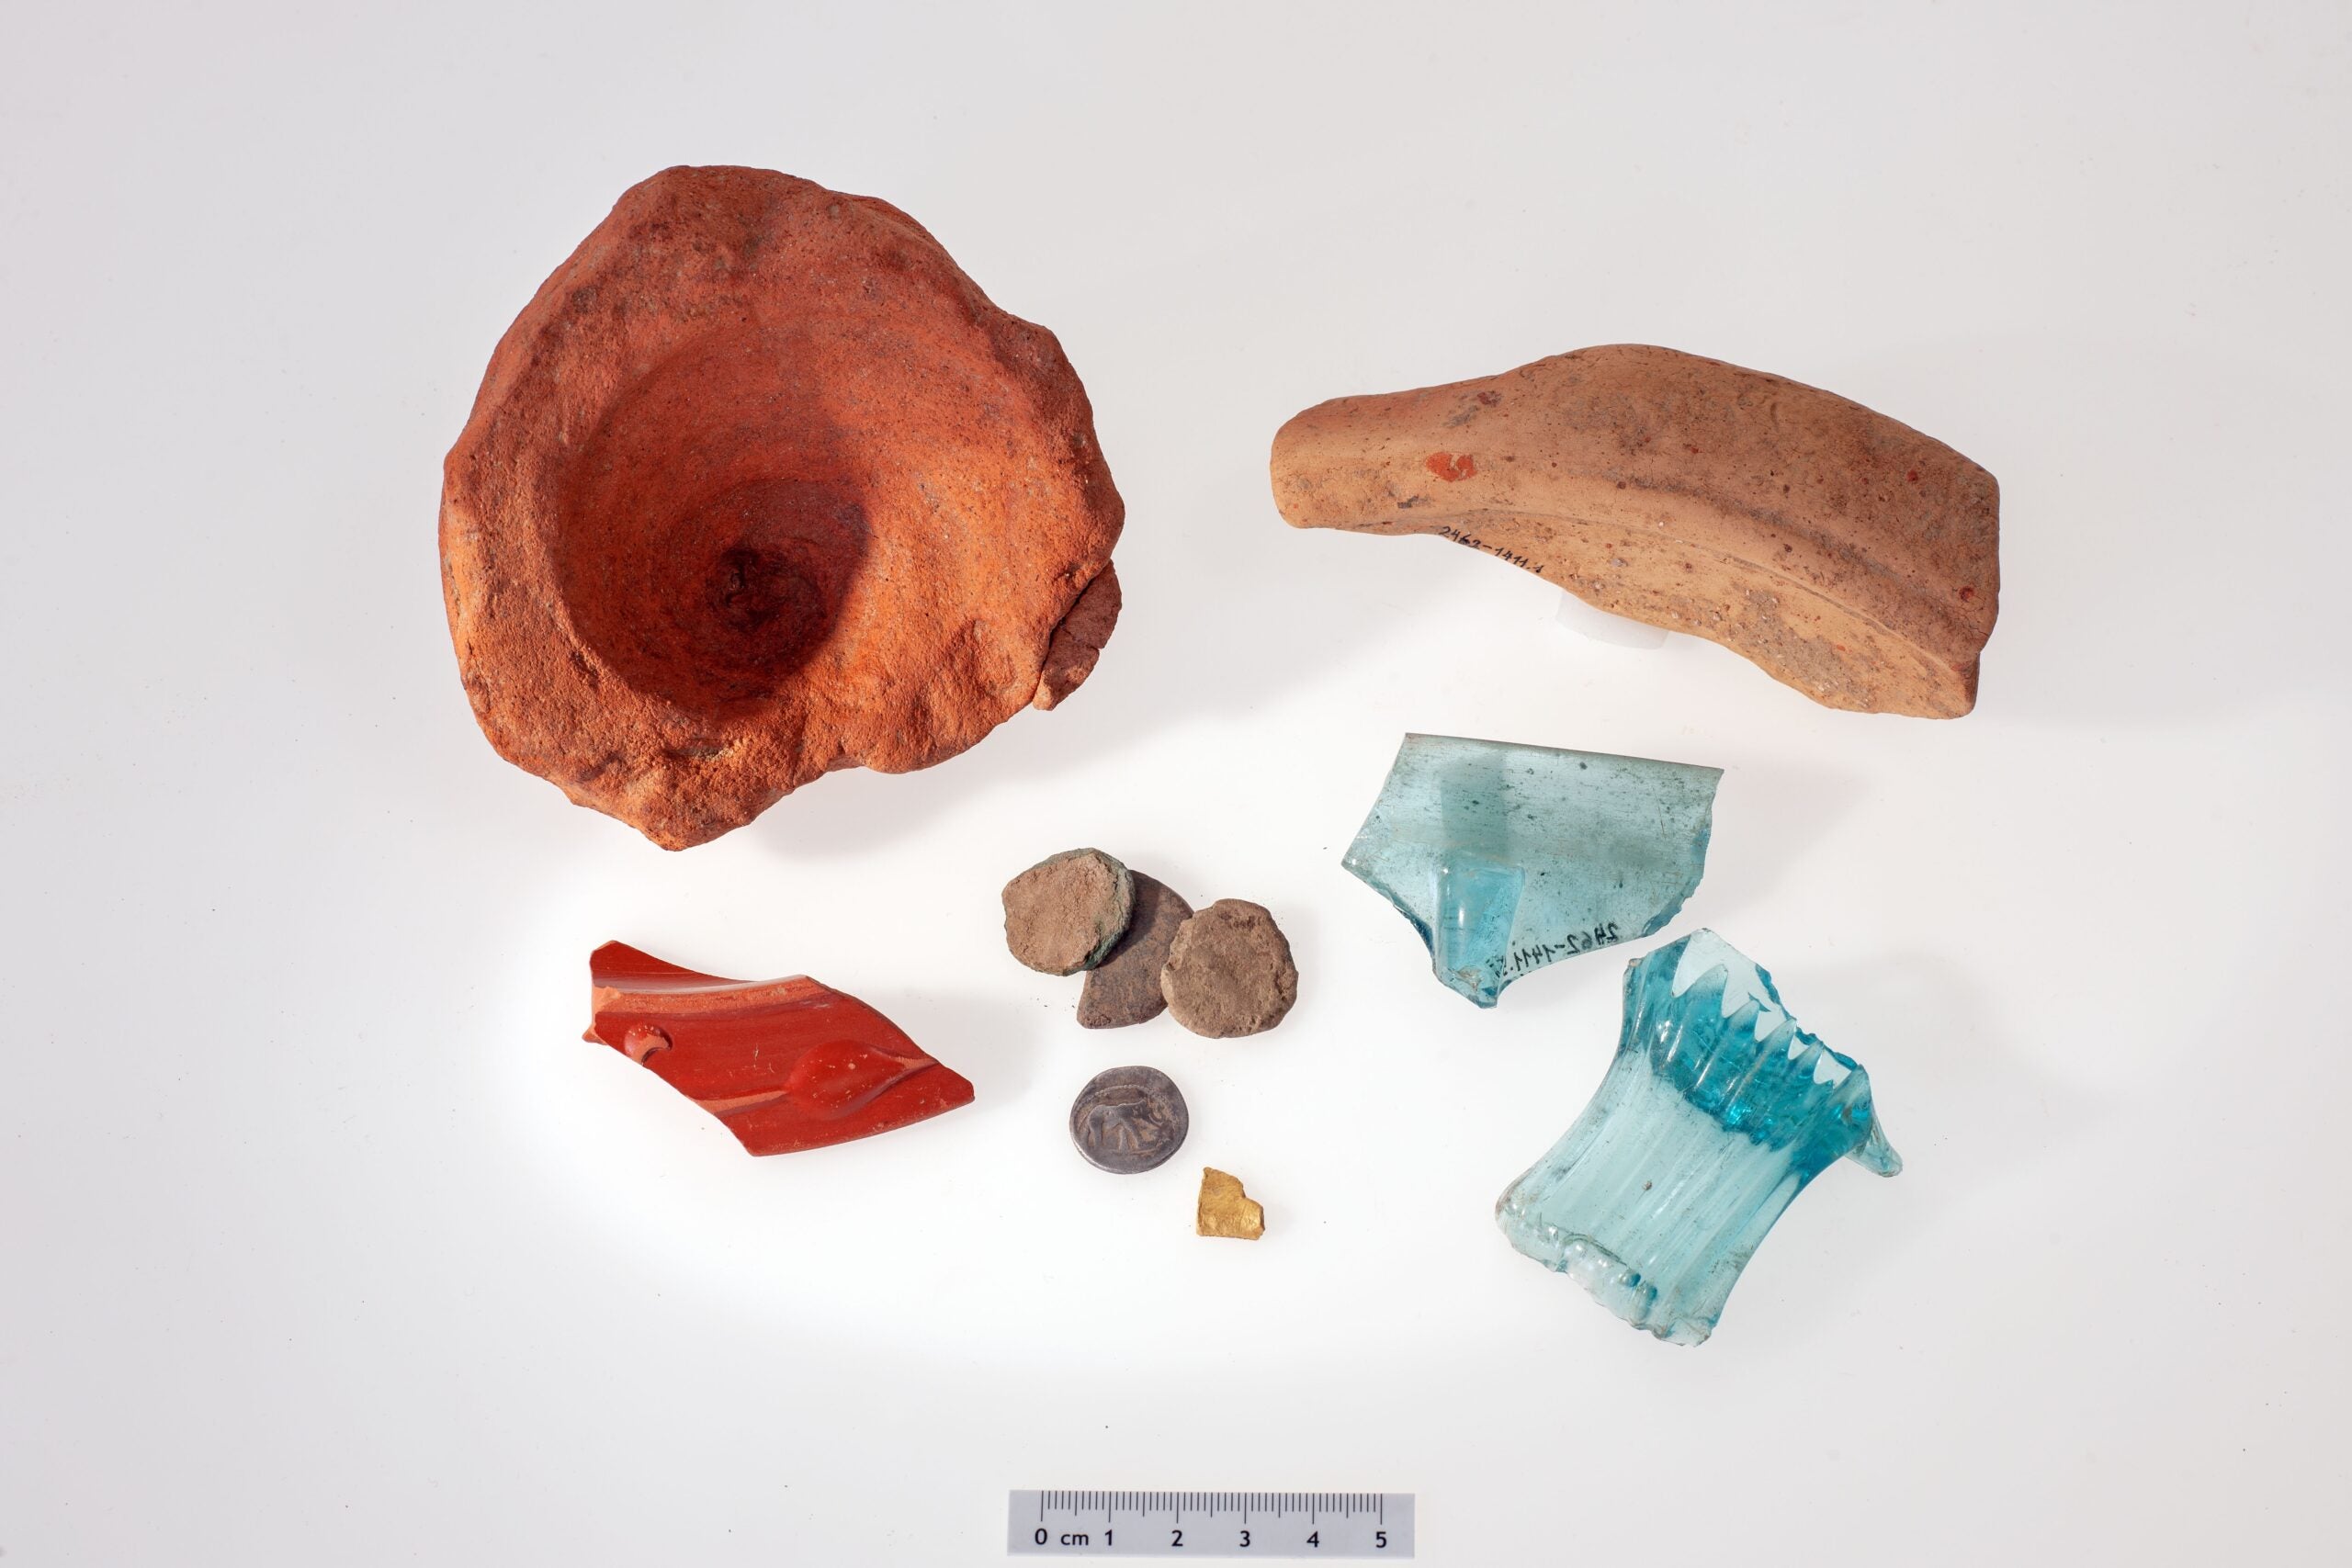 Small selection of Roman finds (from top left to bottom right): An amphora base, the shard of a mortar, the rim of a small bowl of Roman tableware with a red coating (terra sigillata), four coins in as-found condition, one of which was silver from Julius Caesar, Fragment of a gold object, pieces of a square bottle and a blue glass ribbed bowl. CREDIT: ADA Zug, Res Eichenberger